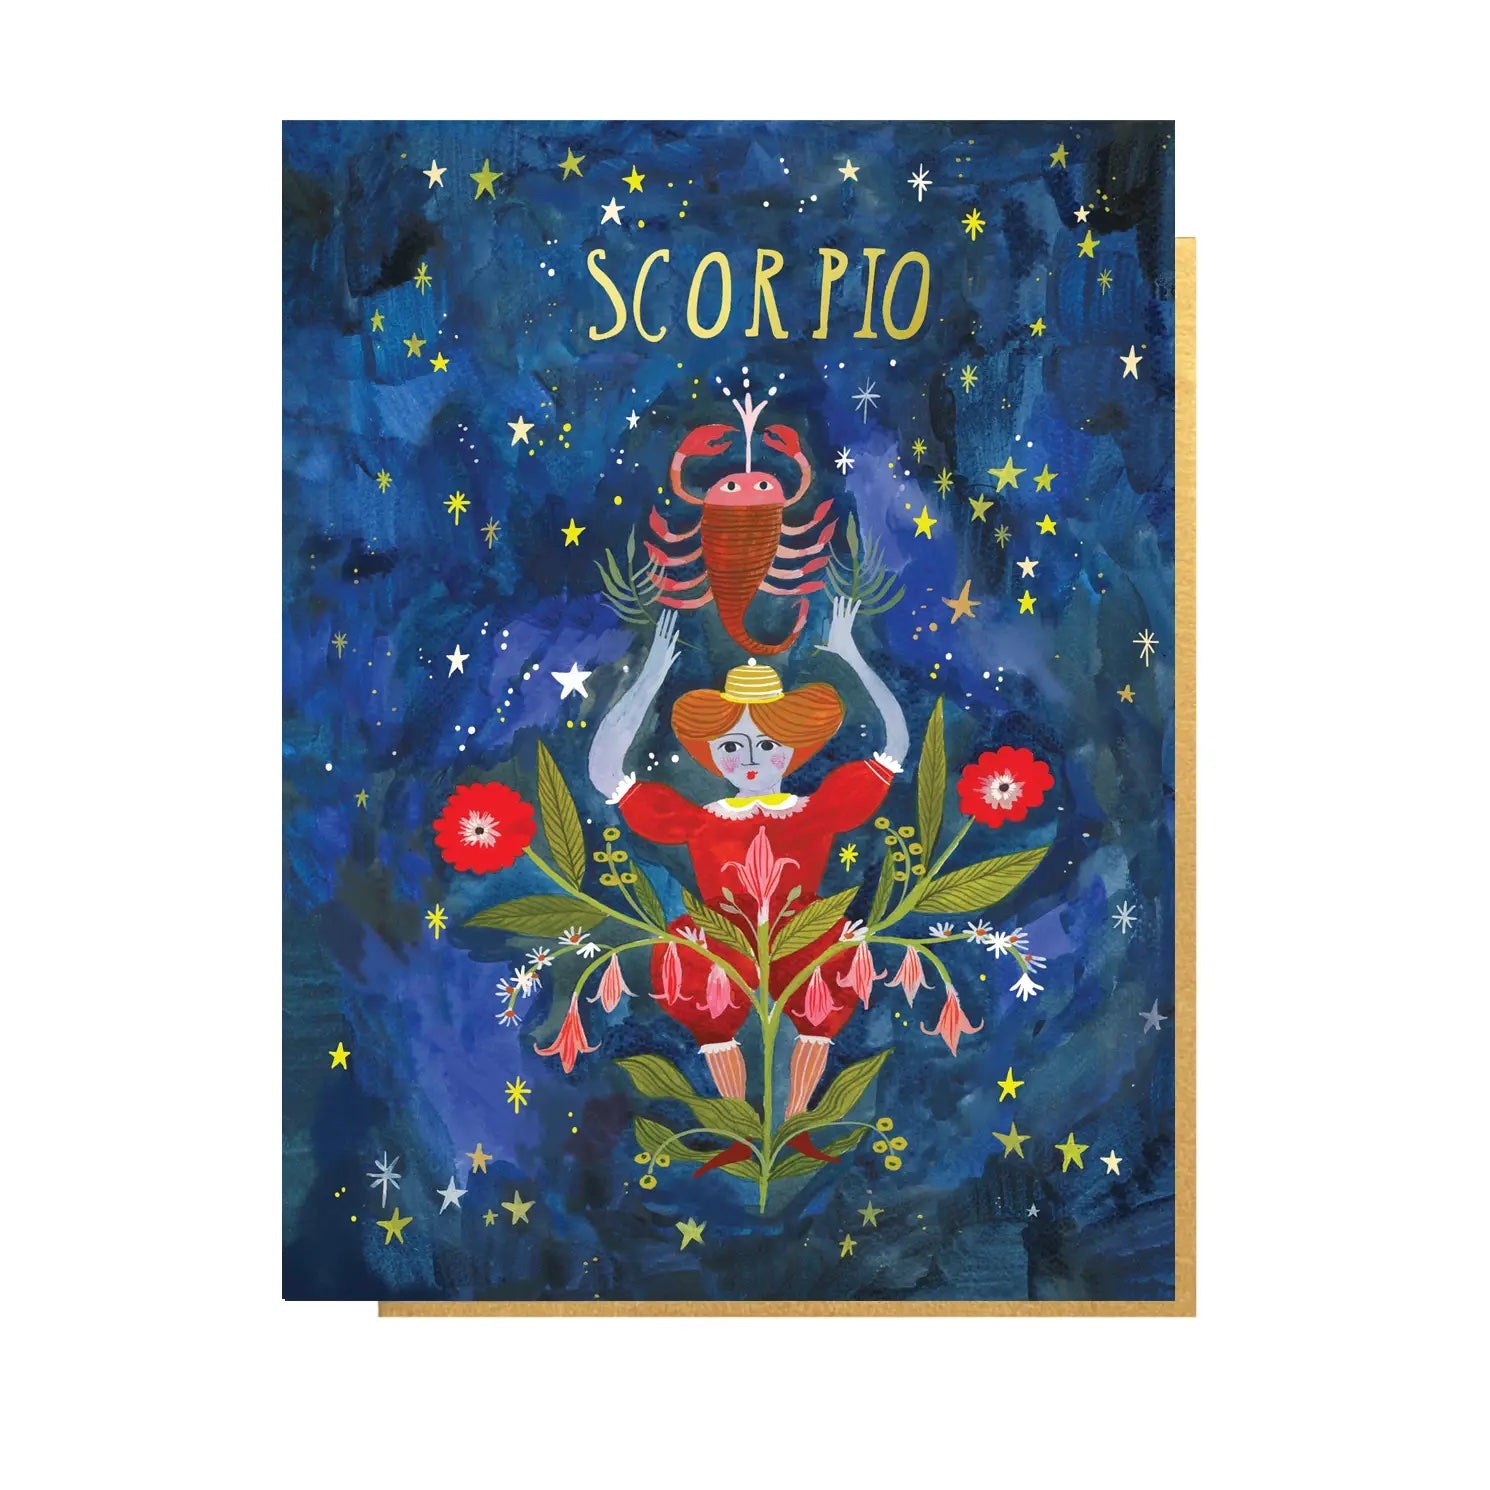 Folding card with illustration of woman in flowers holding a scorpion to the sky Scorpio written above